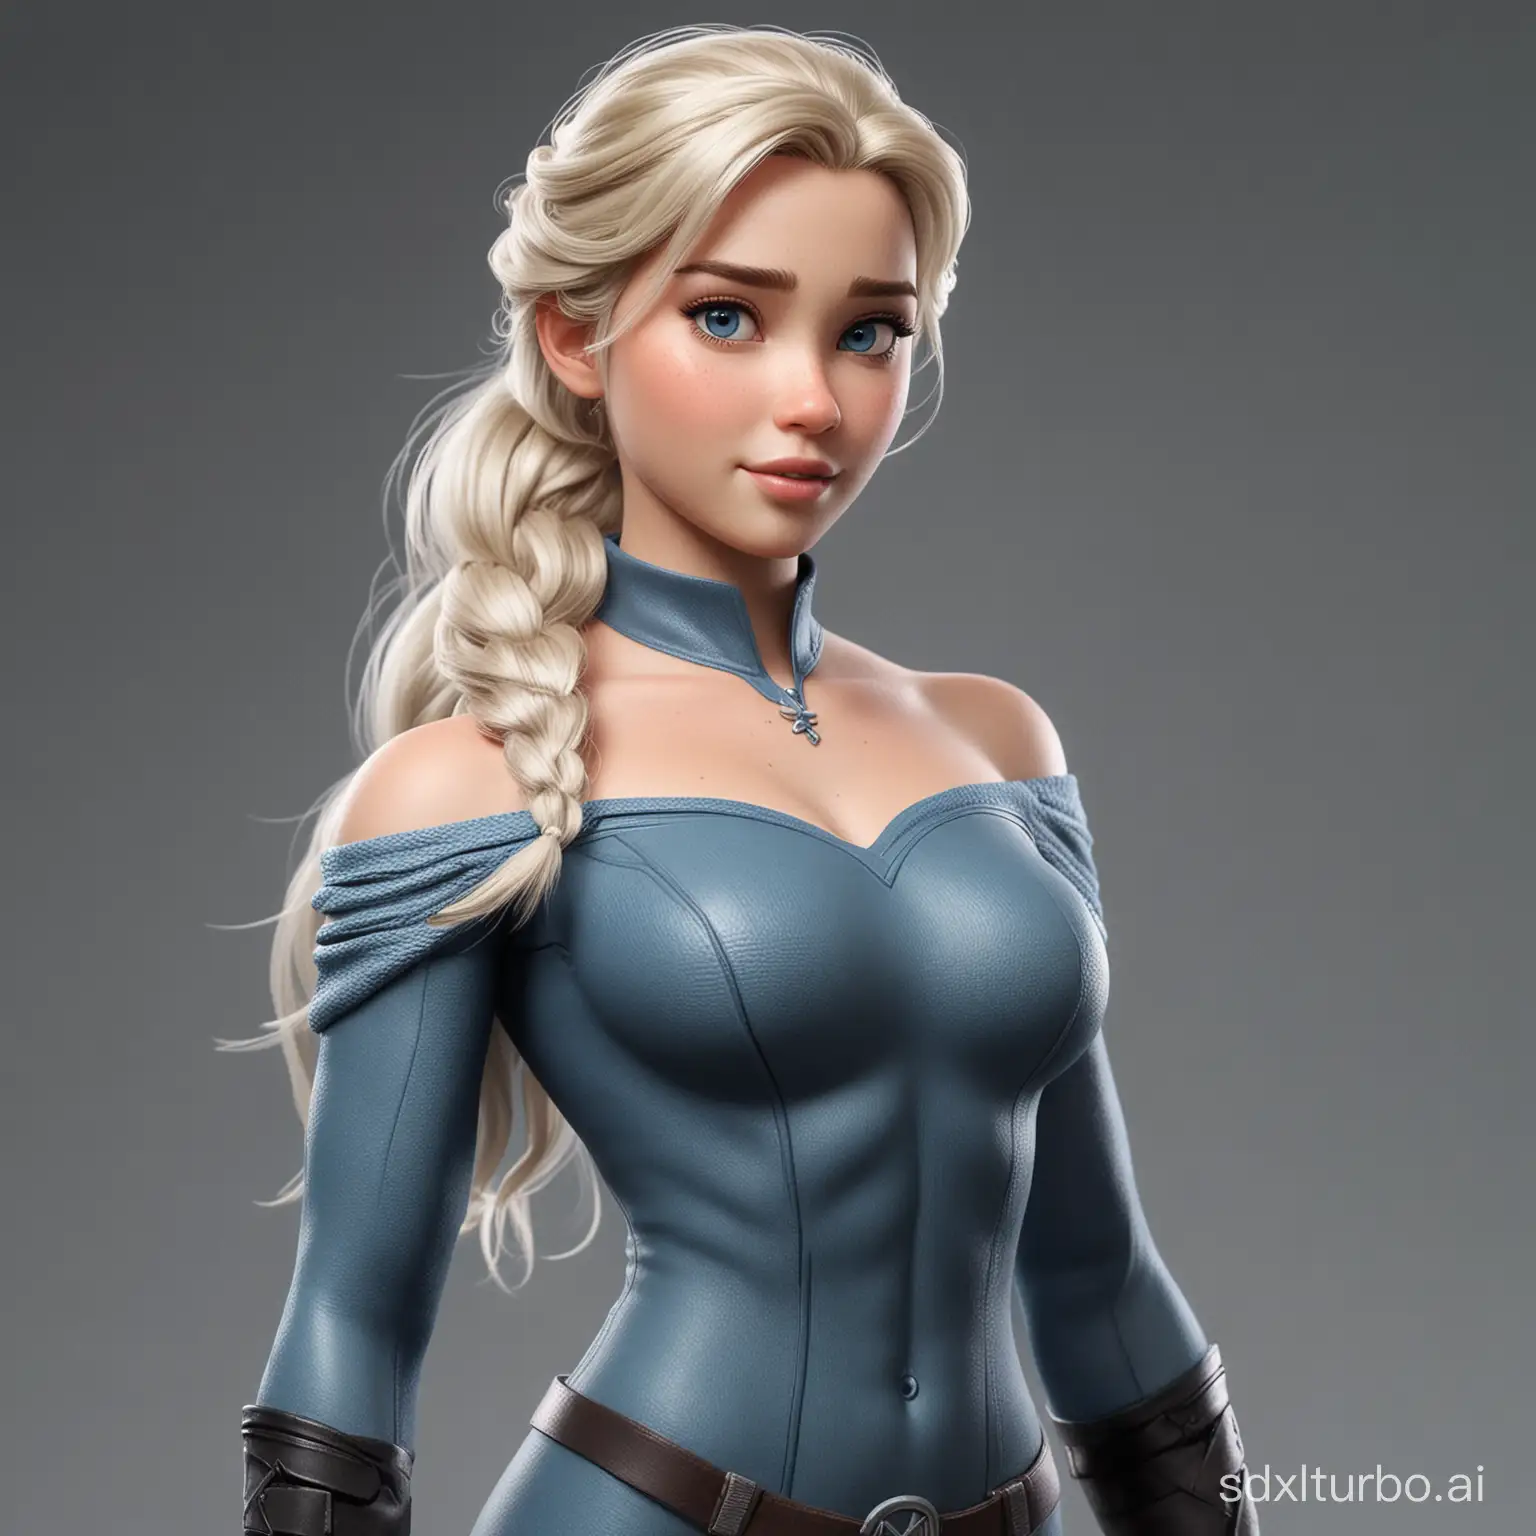 Realistic-Elsa-in-XMen-Tight-Uniform-with-Fit-Body-and-Freckles